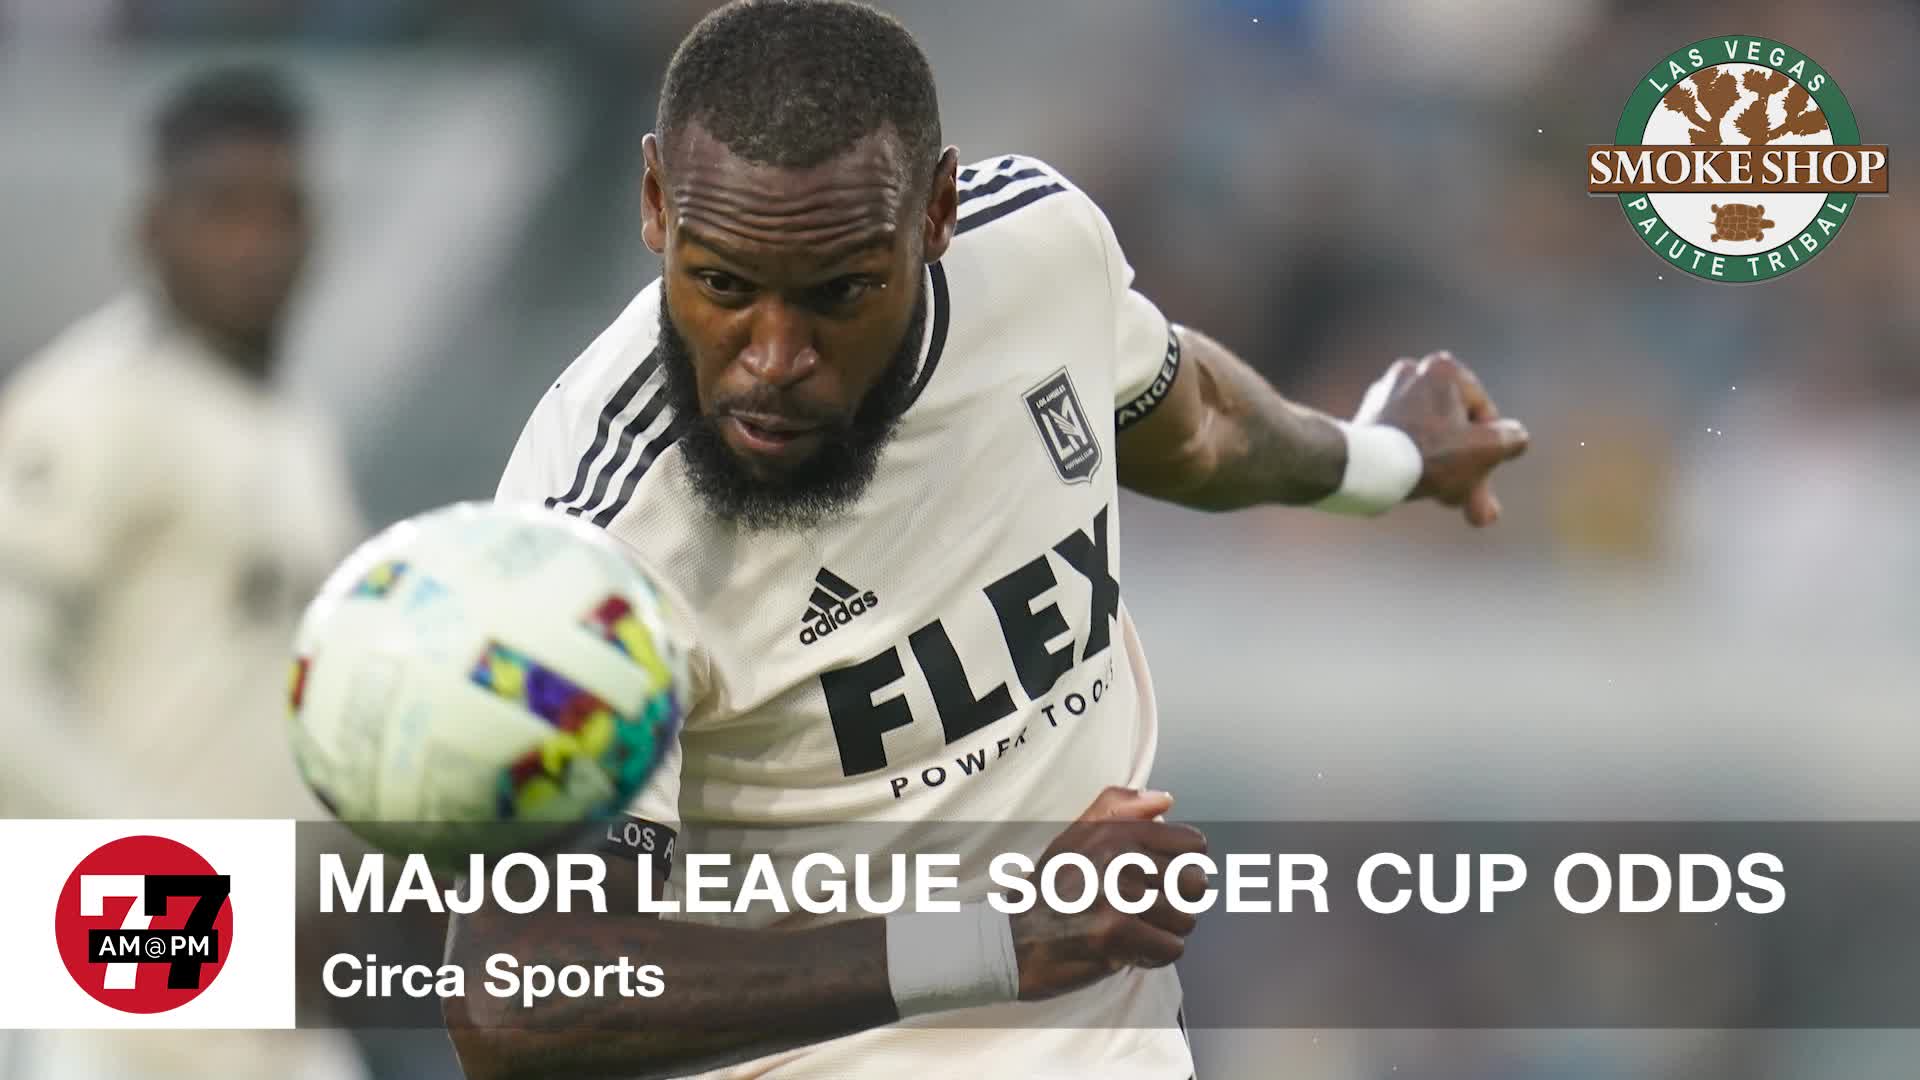 Los Angeles FC is favorite tow in the Major League Soccer Cup